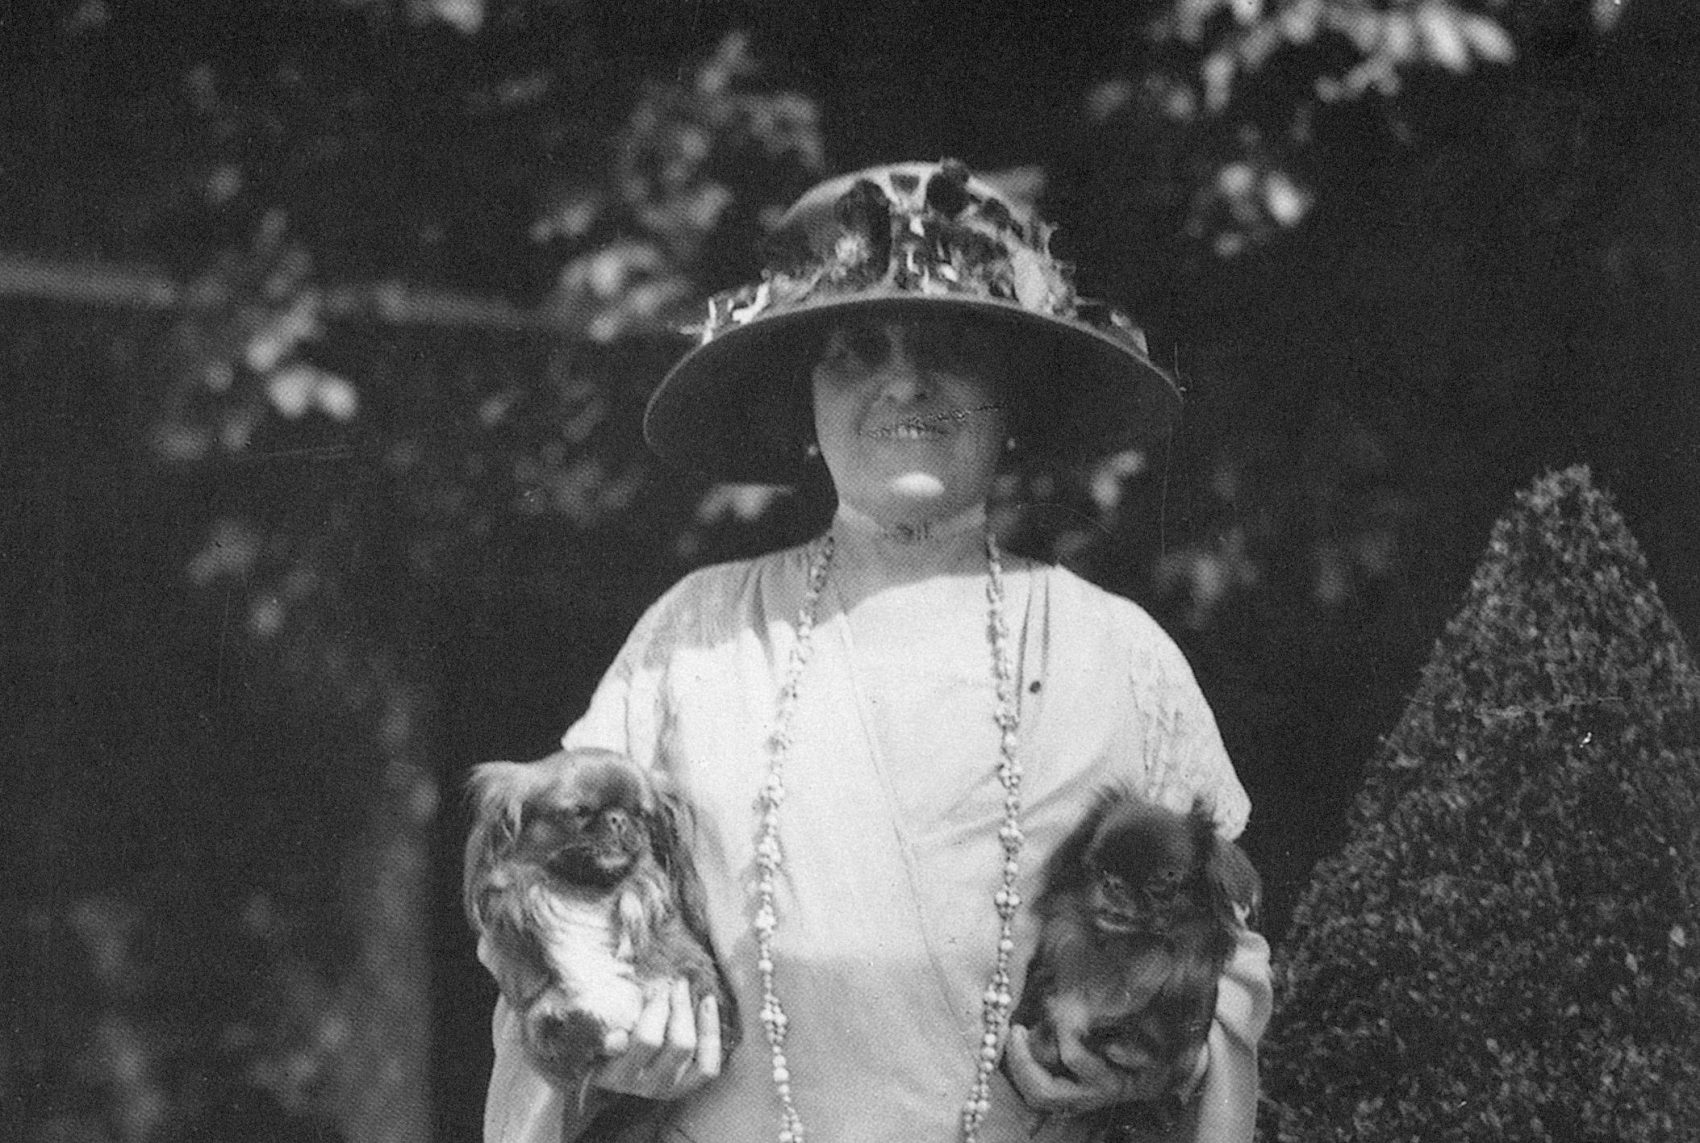 Edith Wharton photographed at her home in France with her two pet Pekingese dogs in the 1920s. (Courtesy Granger Historical Picture Archive/Alamy)